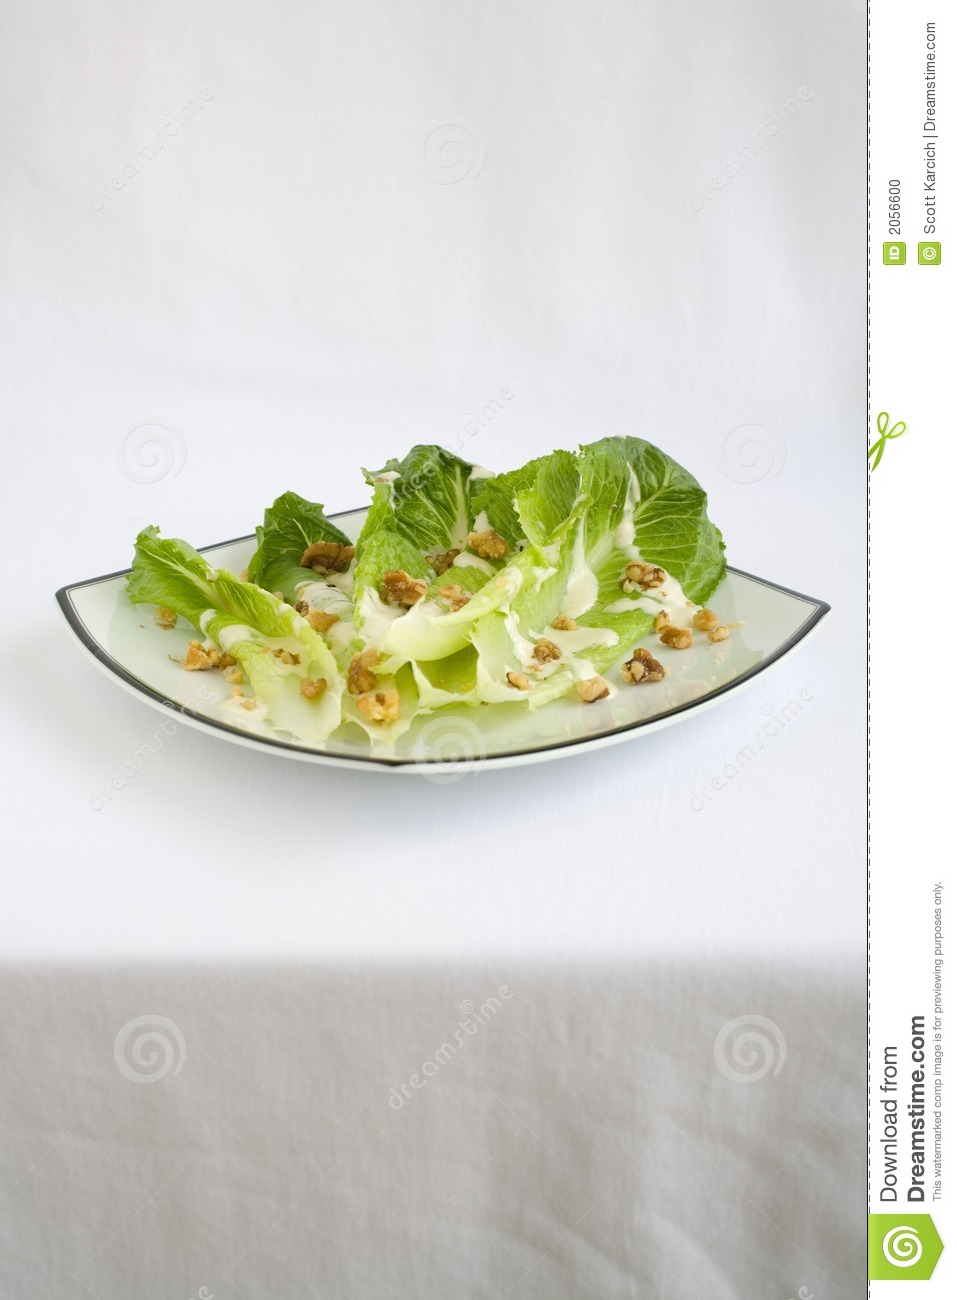 Salad With Romaine Lettuce Walnuts And Creamy Ranch Dressing 